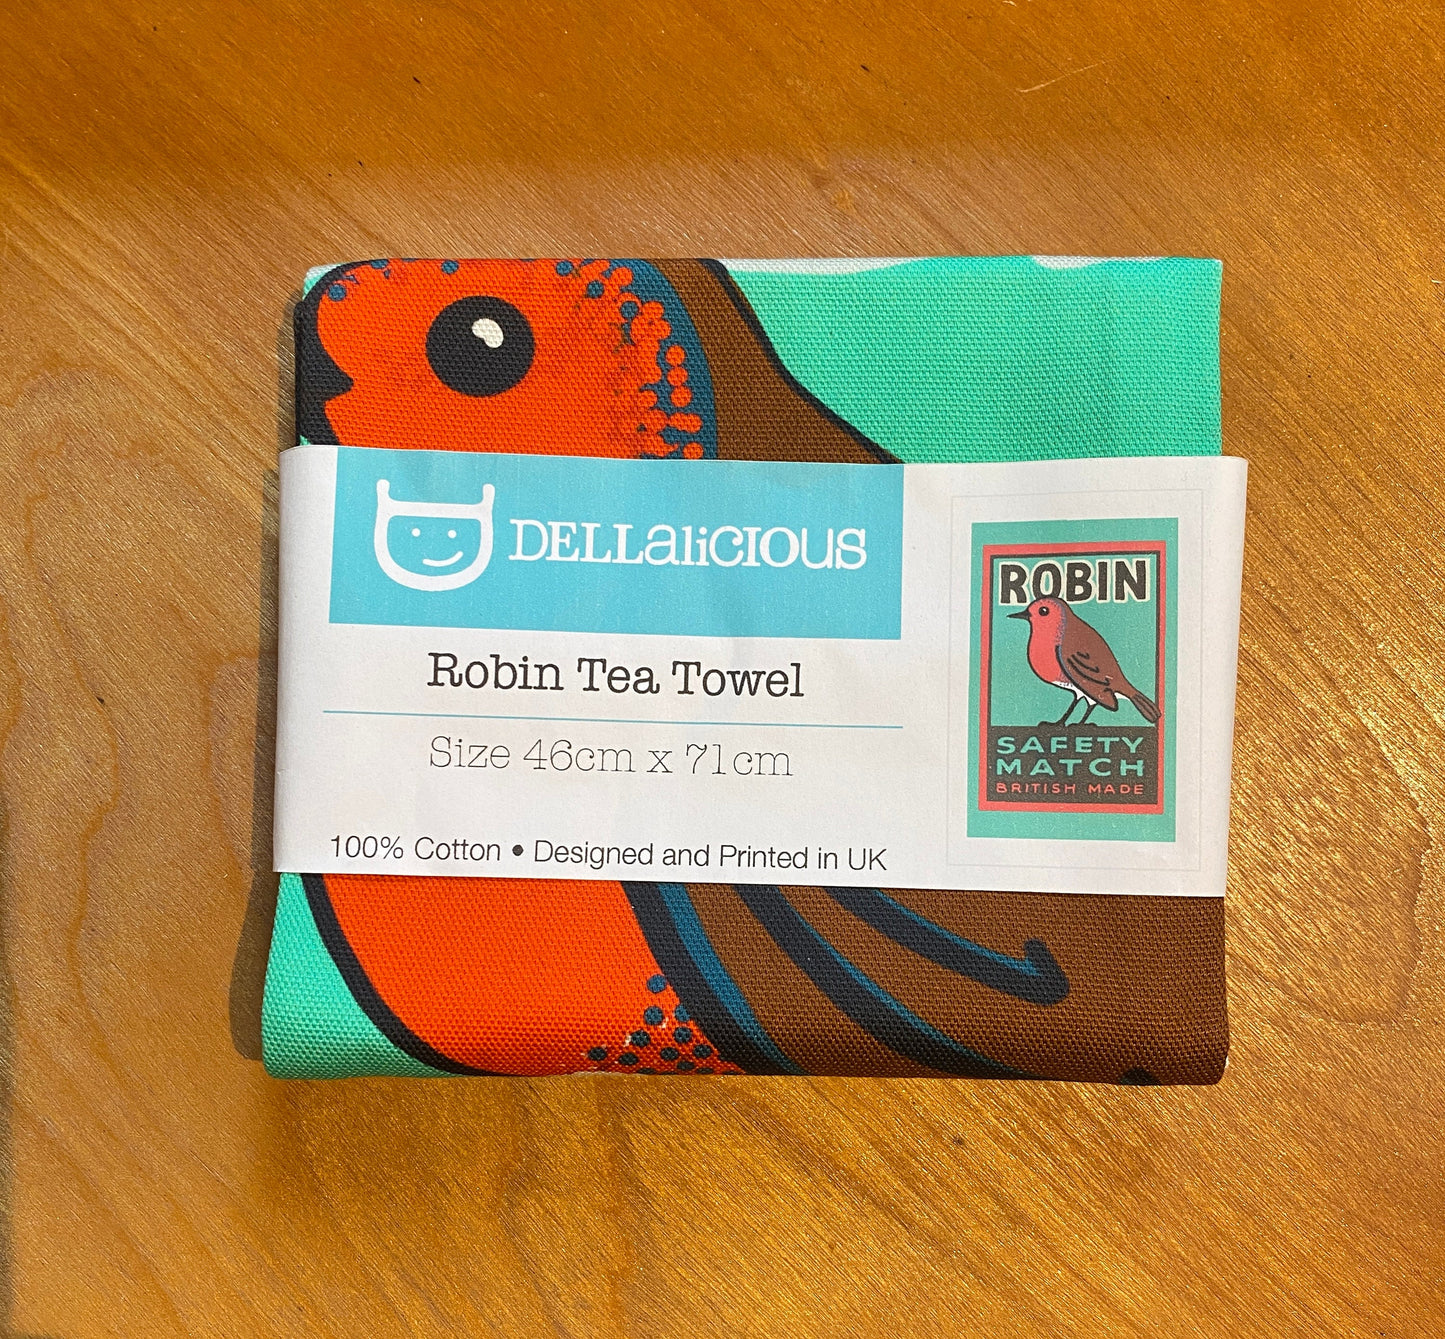 100% Cotton Robin Tea Towel, Matchbox label art, Designed and Printed in the UK